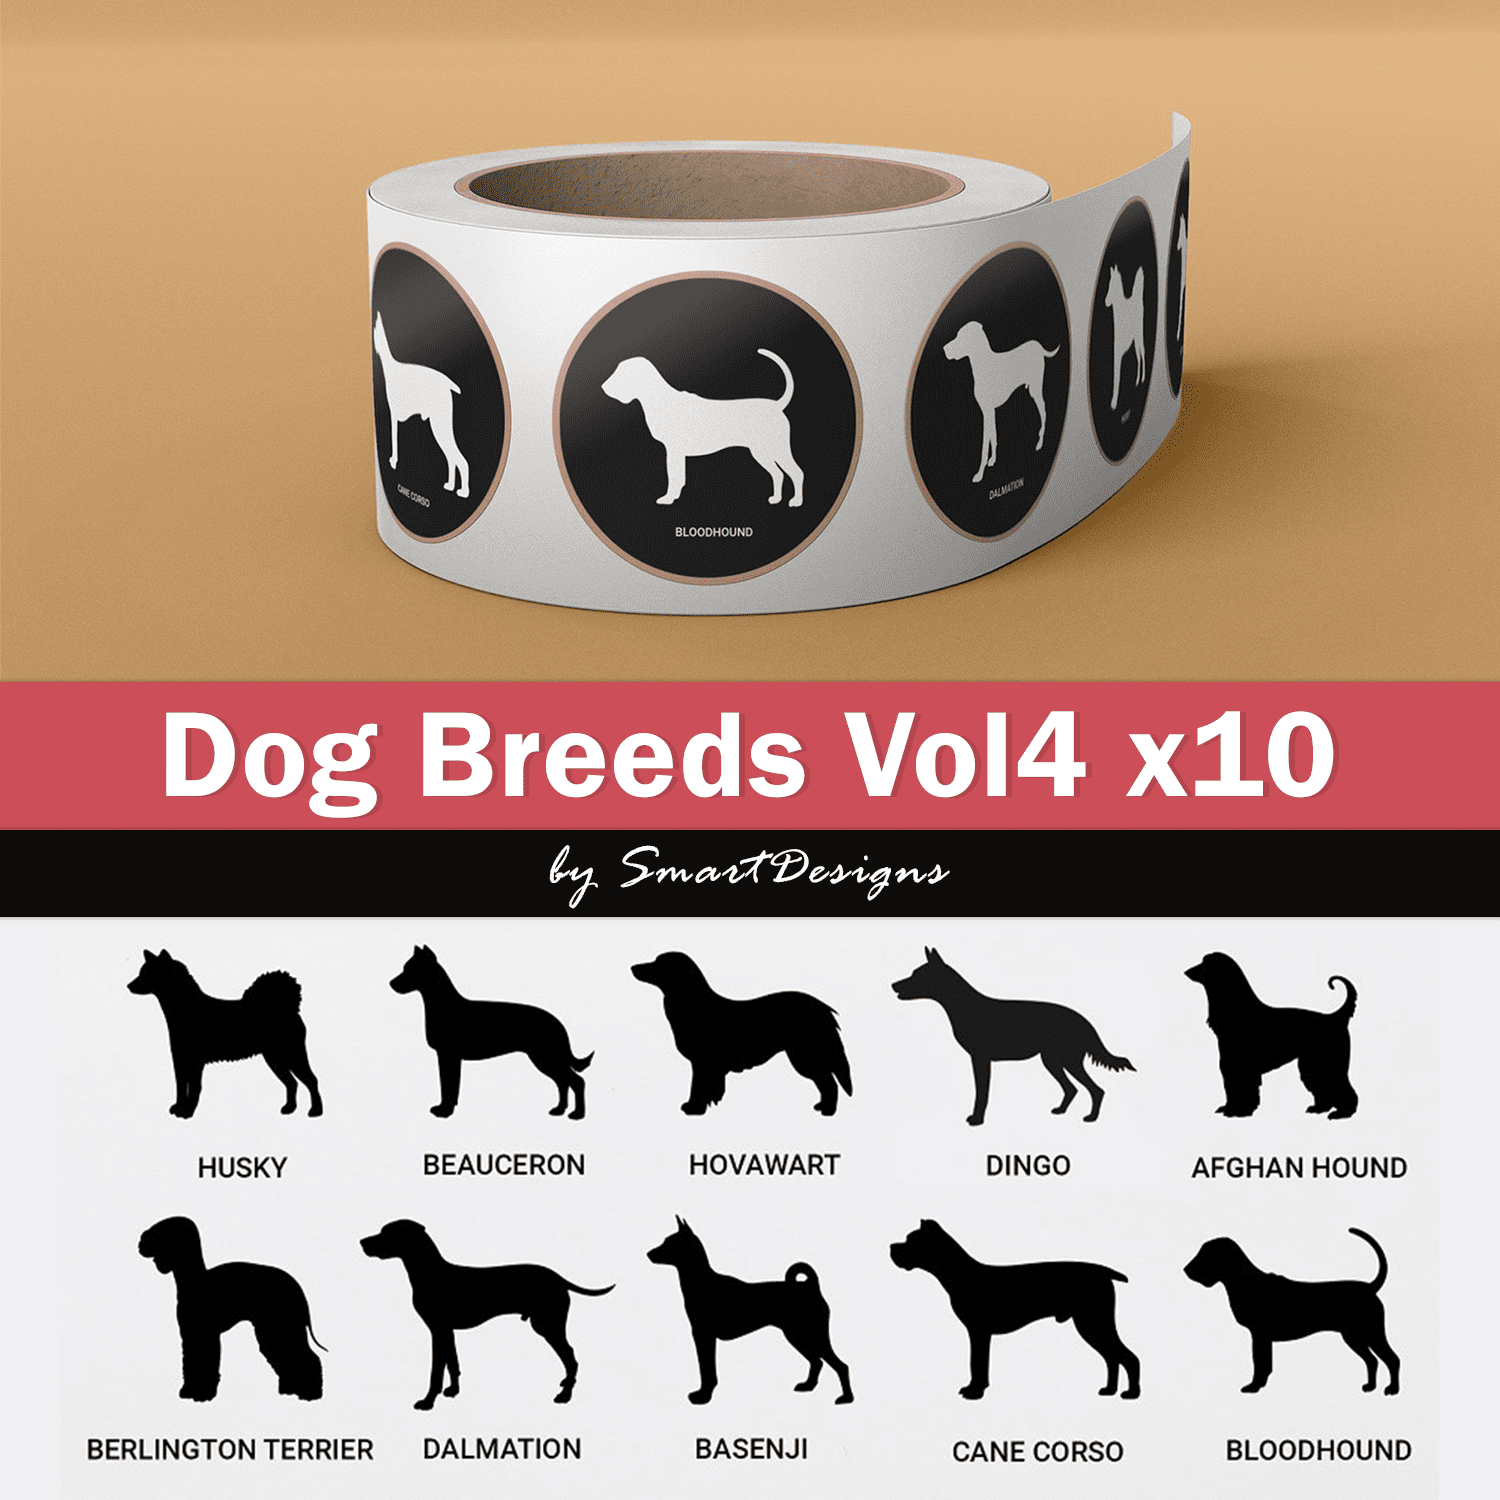 Preview dog breeds.